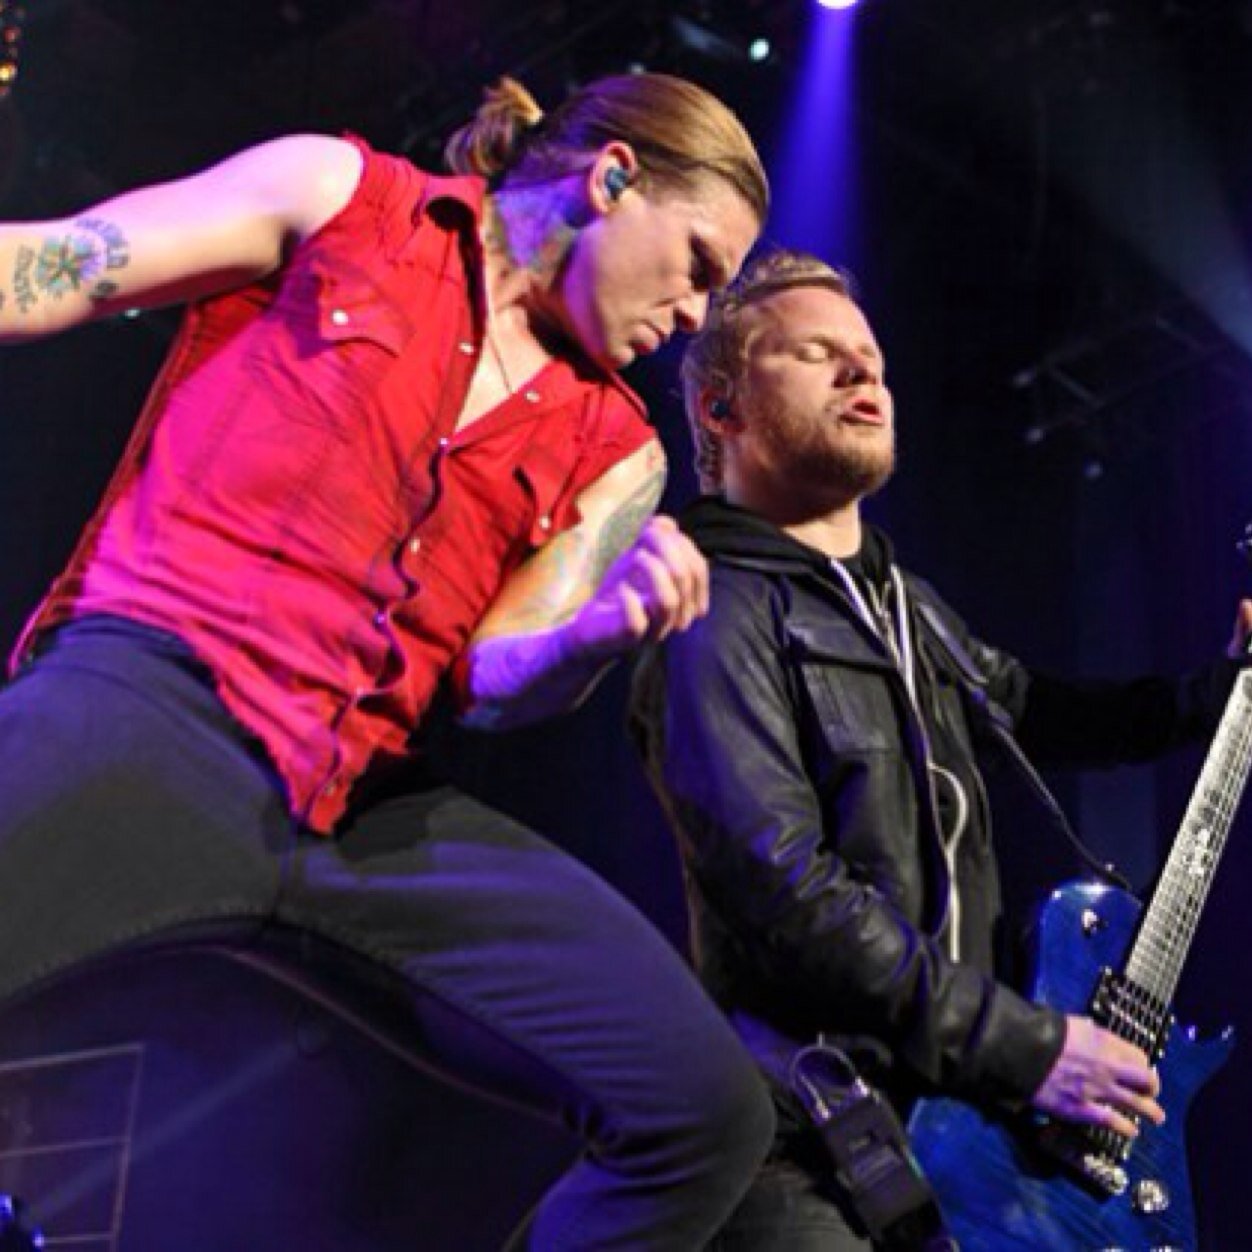 This account is now run by Tara (-T), Terra (feet emoji), and Elisabeth (-E)! #BrachSmyers: the bromance between Brent Smith and Zach Myers of Shinedown :)